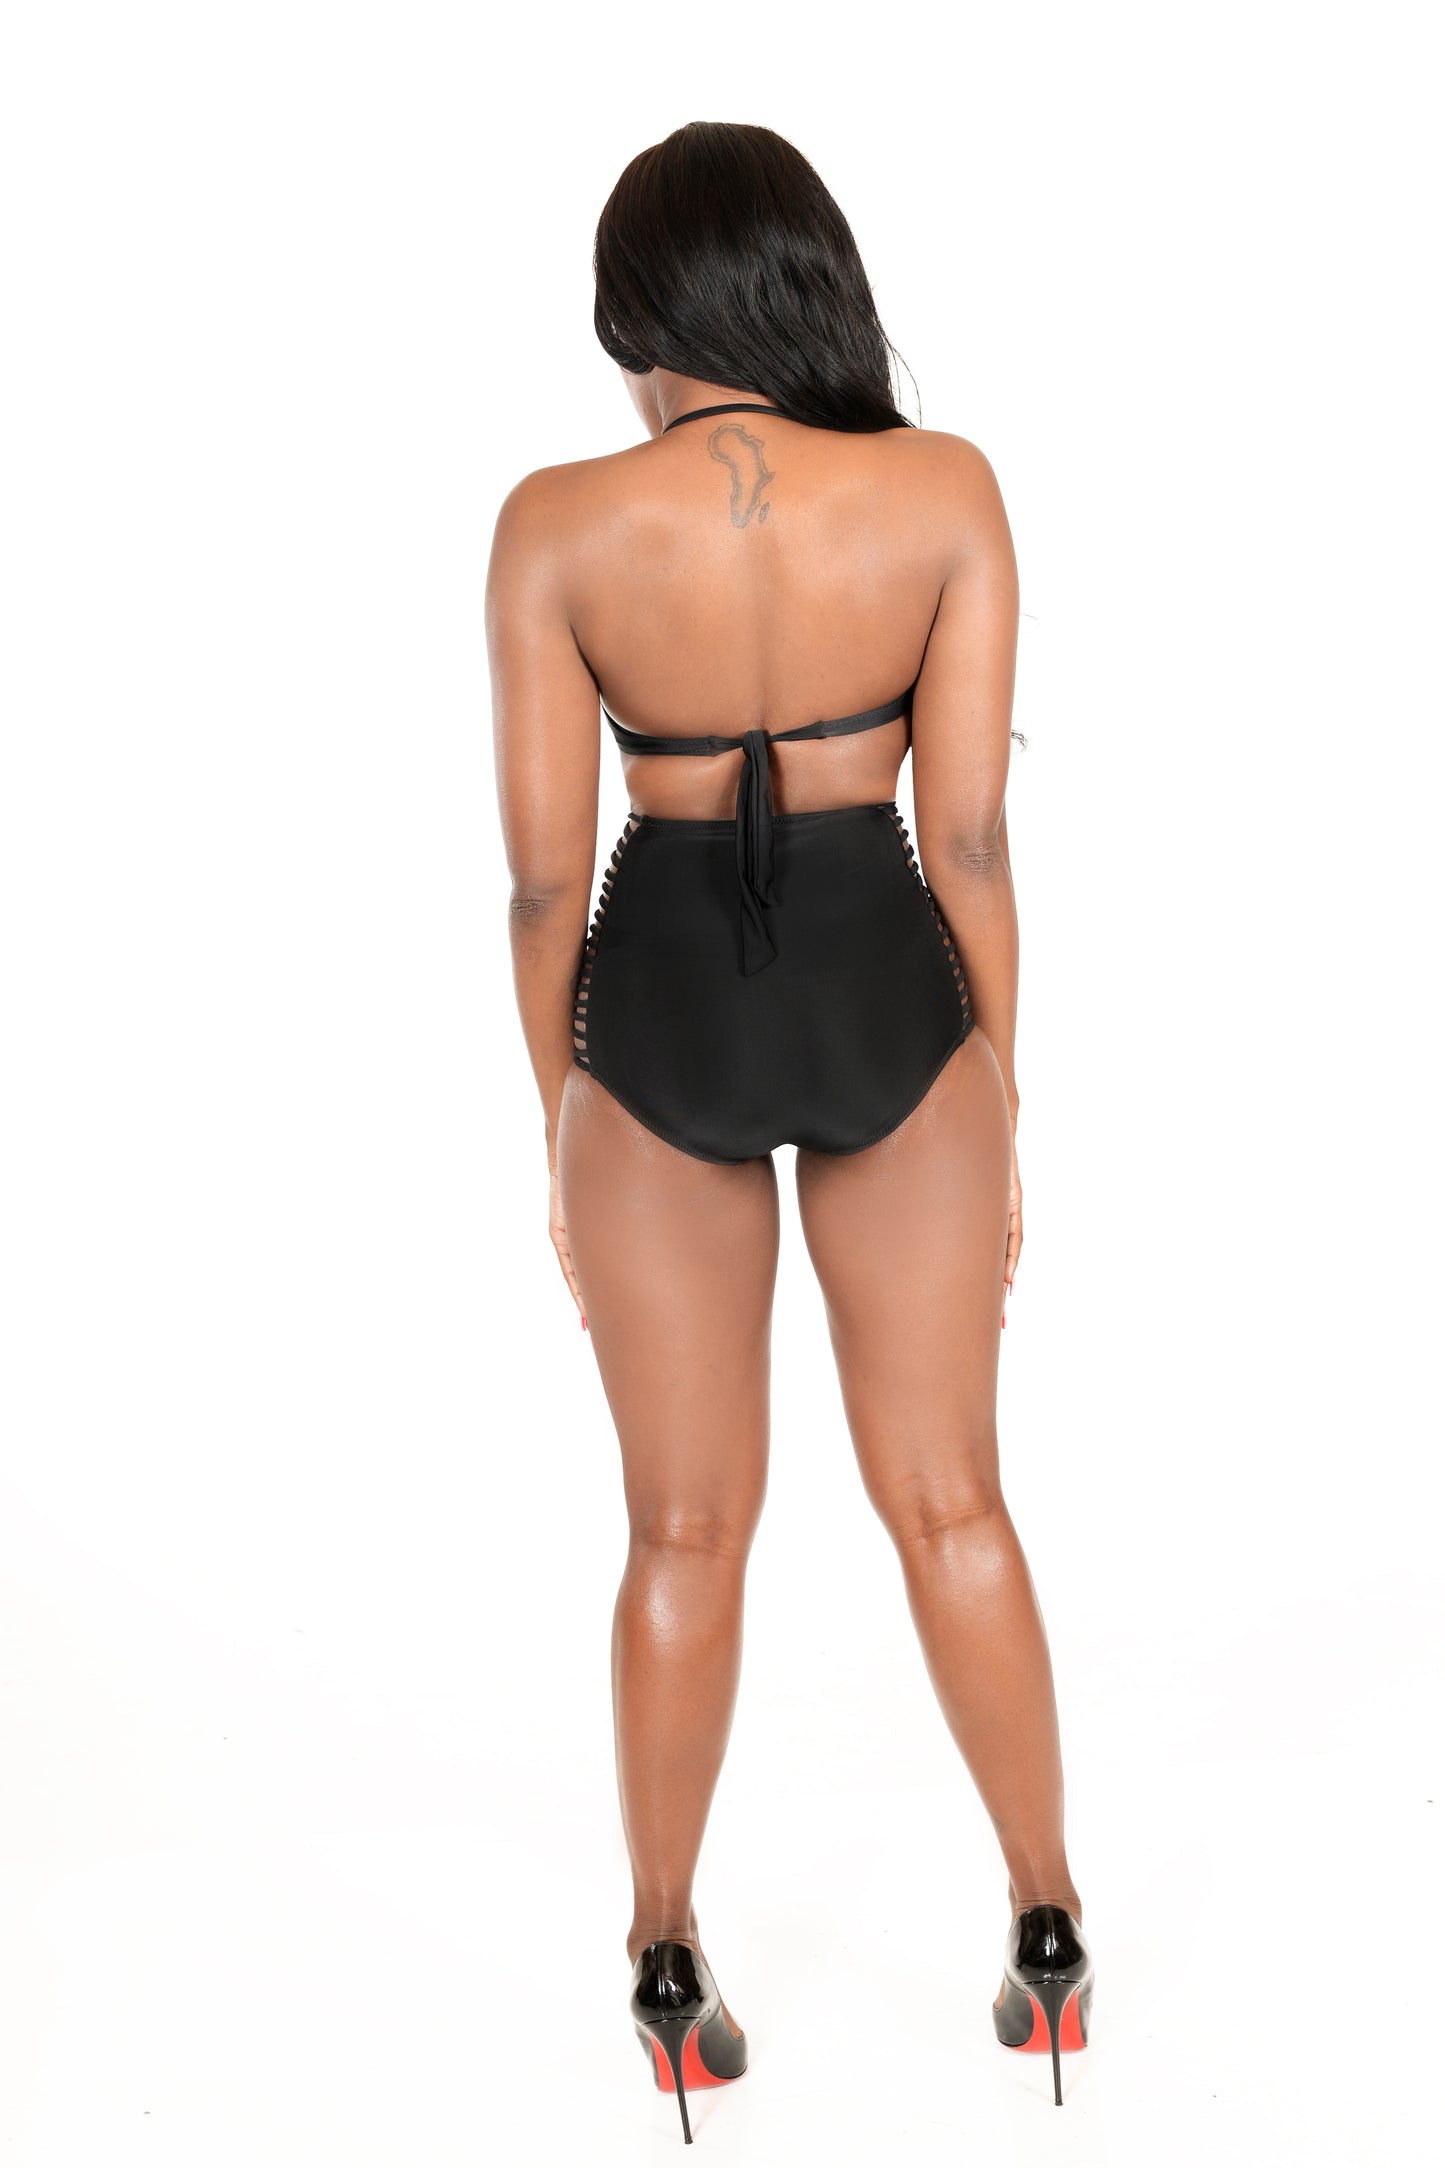 THE MIAMI NIGHTS SWIMSUIT